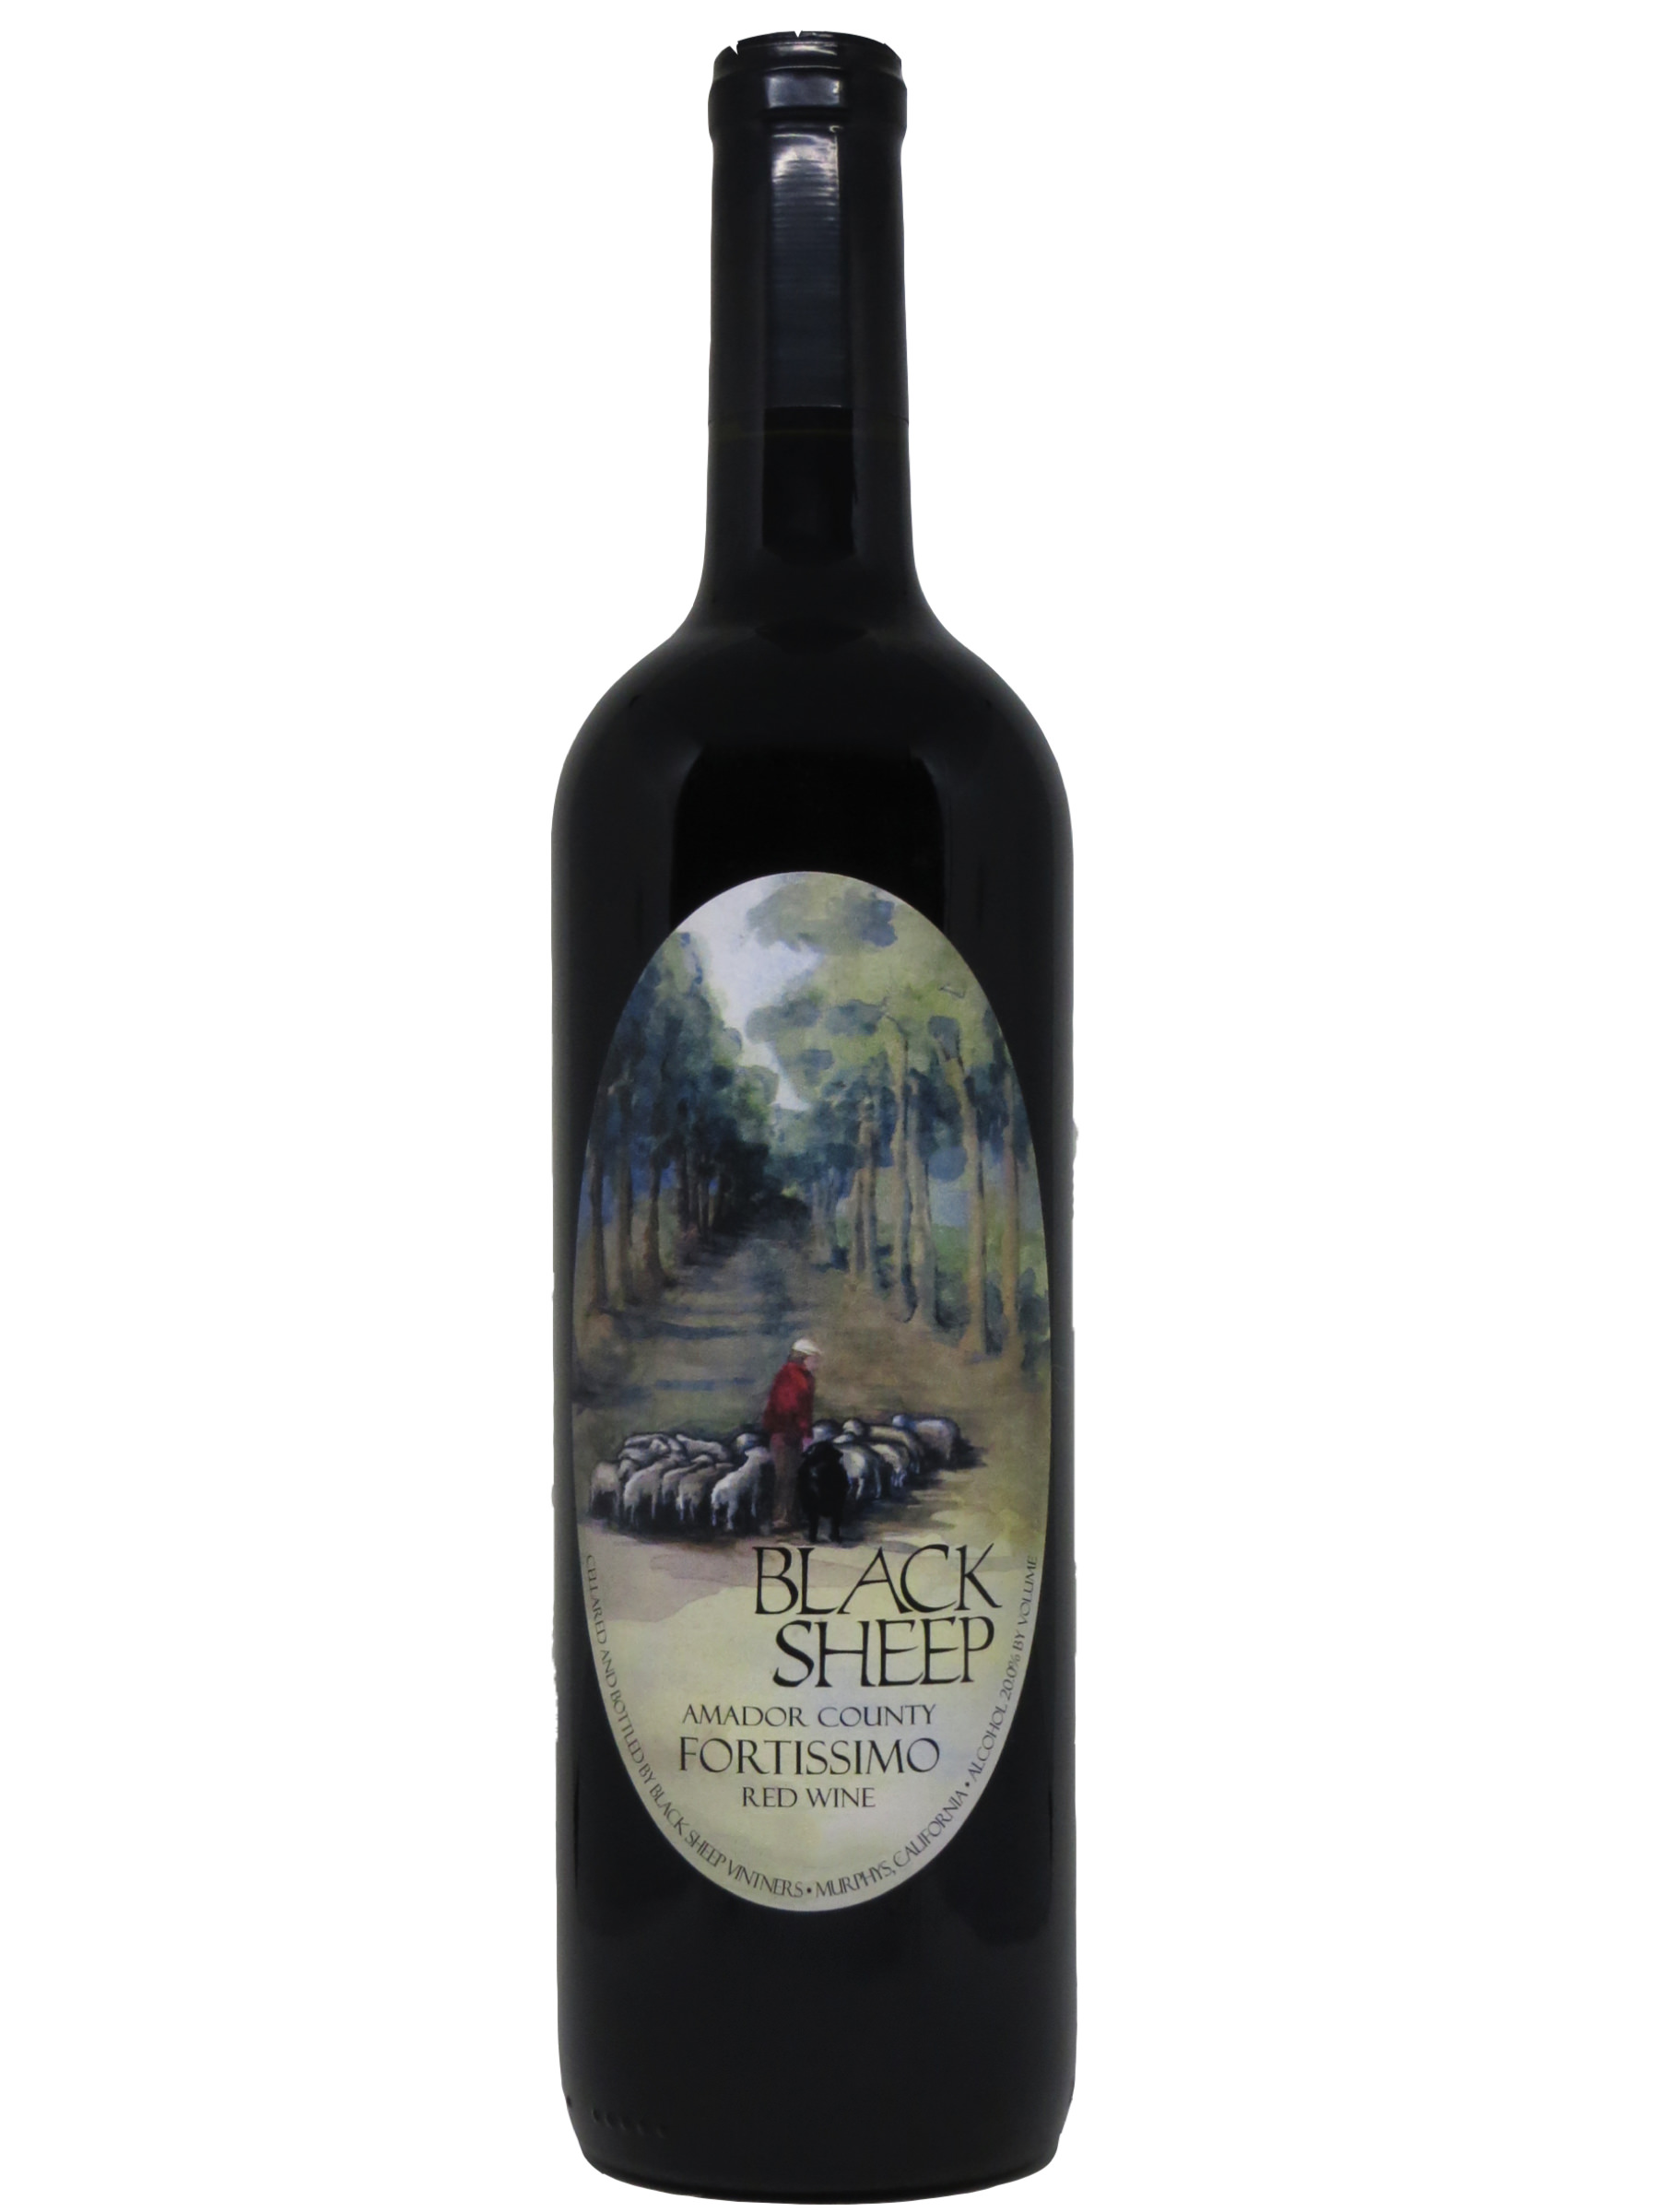 Bottle of Black Sheep Winery Fortissimo